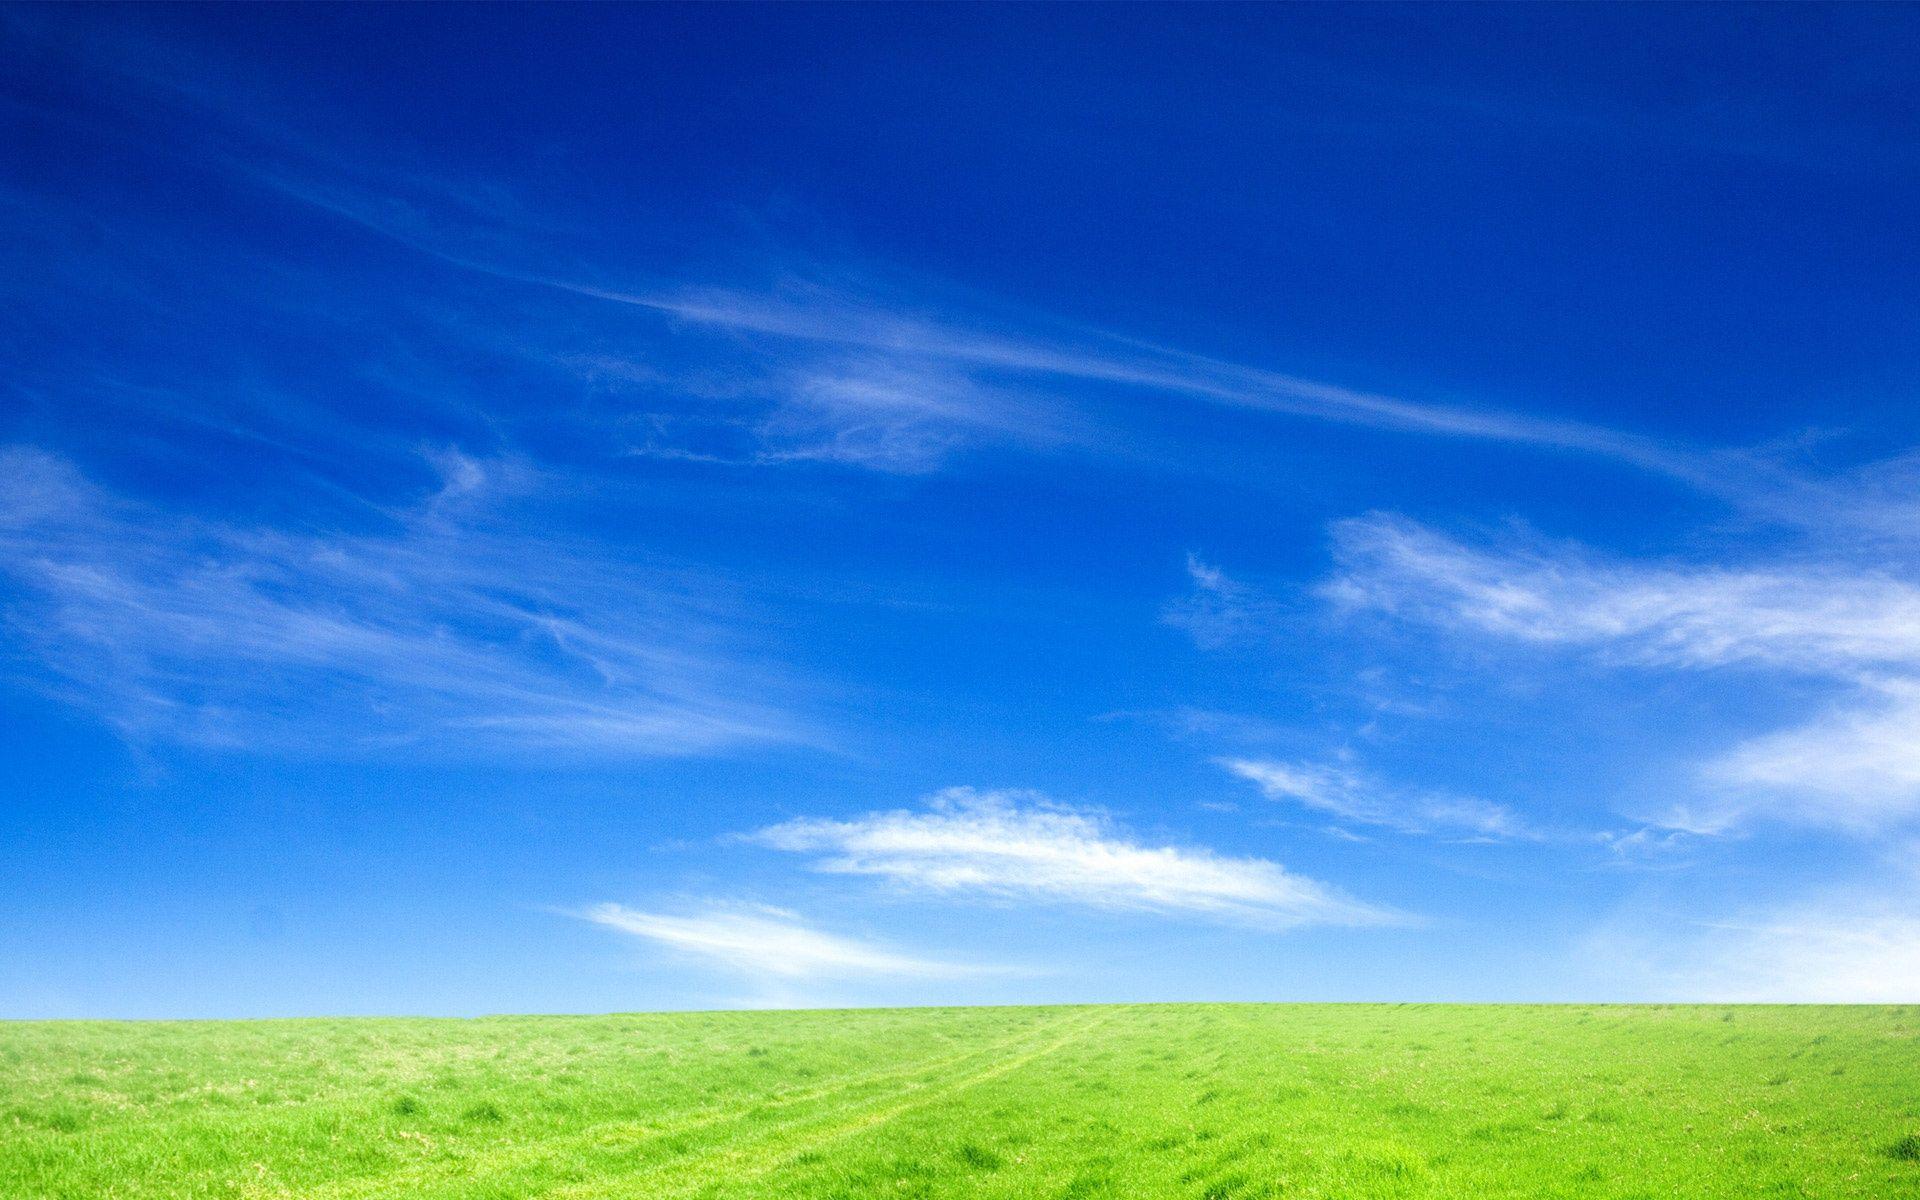 Blue Sky and Green Grass Wallpaper in jpg format for free